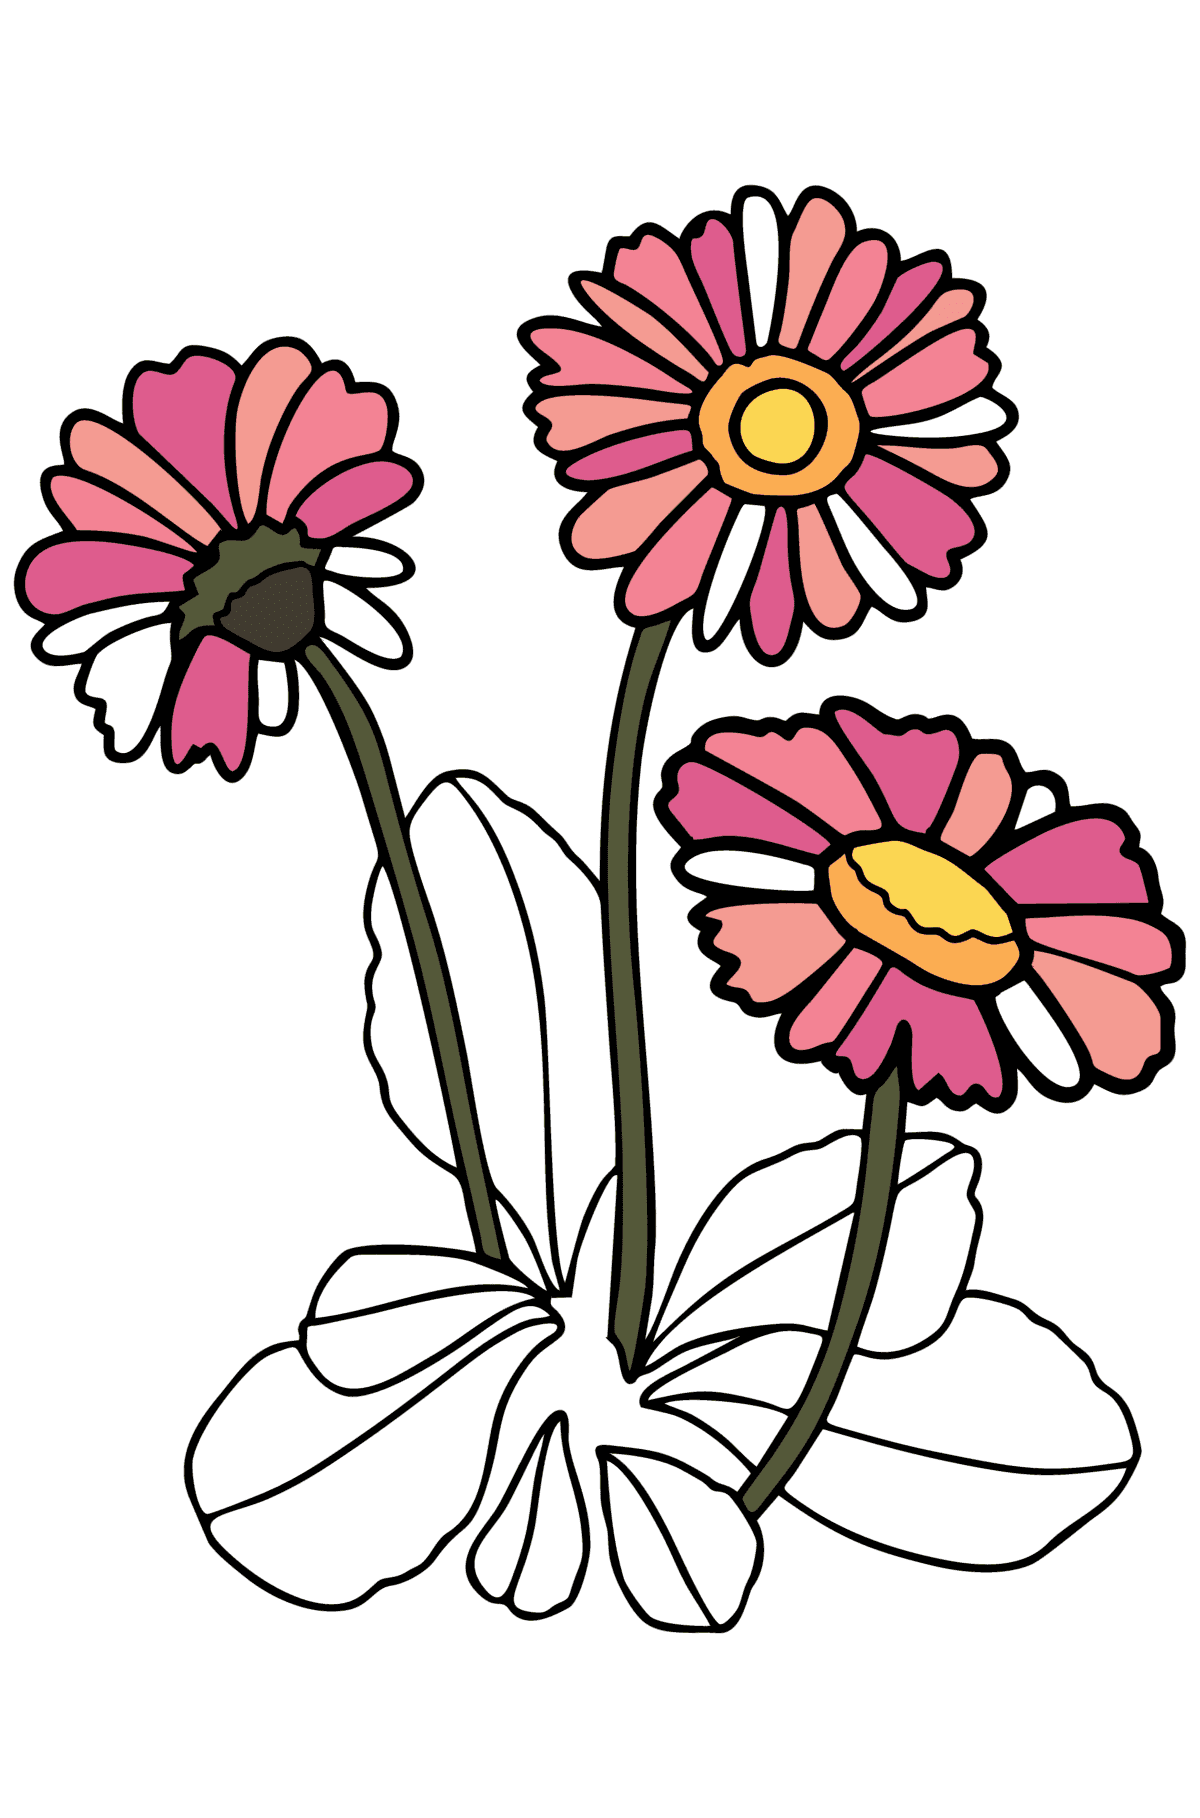 Daisy coloring page - Coloring Pages for Kids